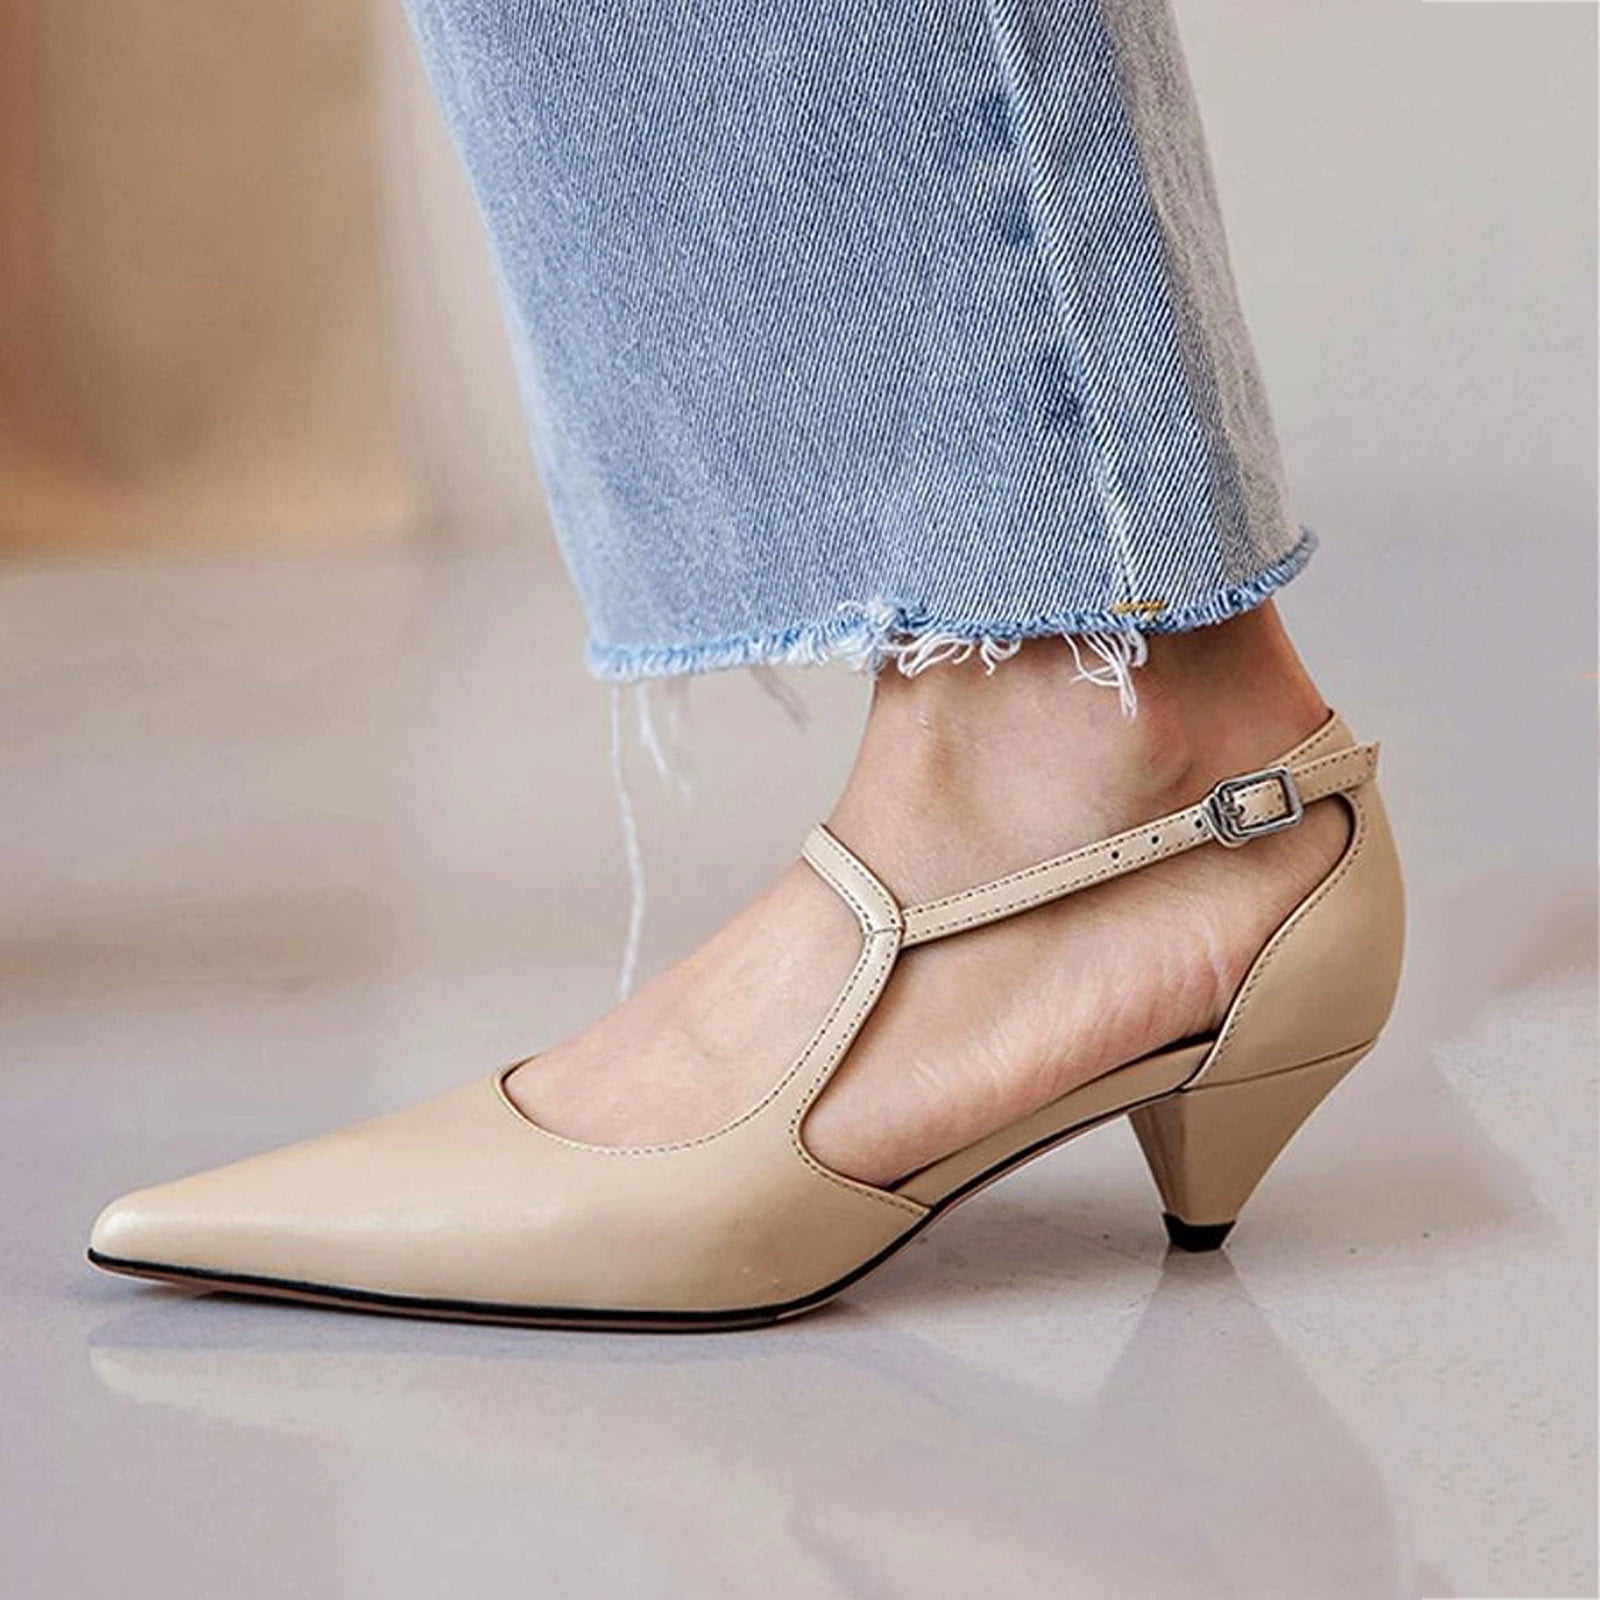 Women's Kitten Heels Pointed Closed Toe Pumps Wedding Office Work  Comfortable Low Heel Dress Shoes for Women with Cushioned Inner Sole Black 7